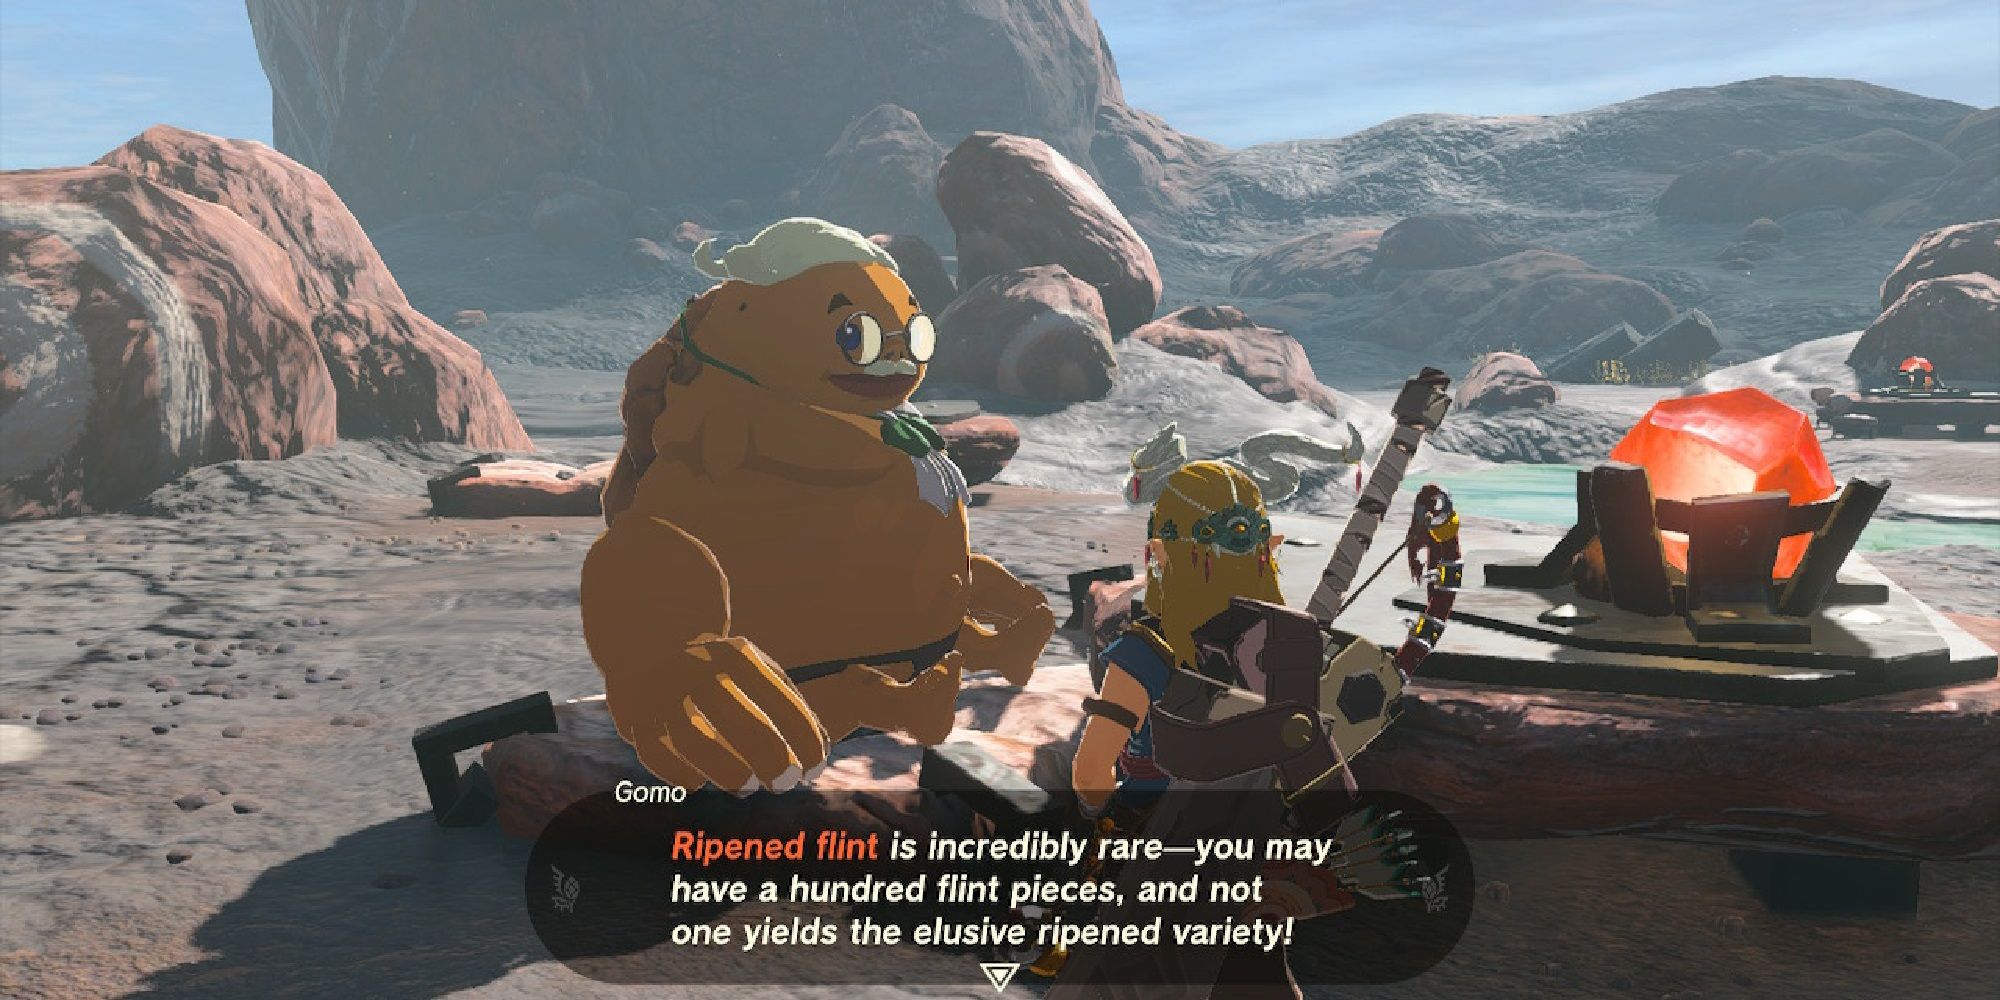 A goron with small round glasses and an ascot talks about how rare ripened flint is